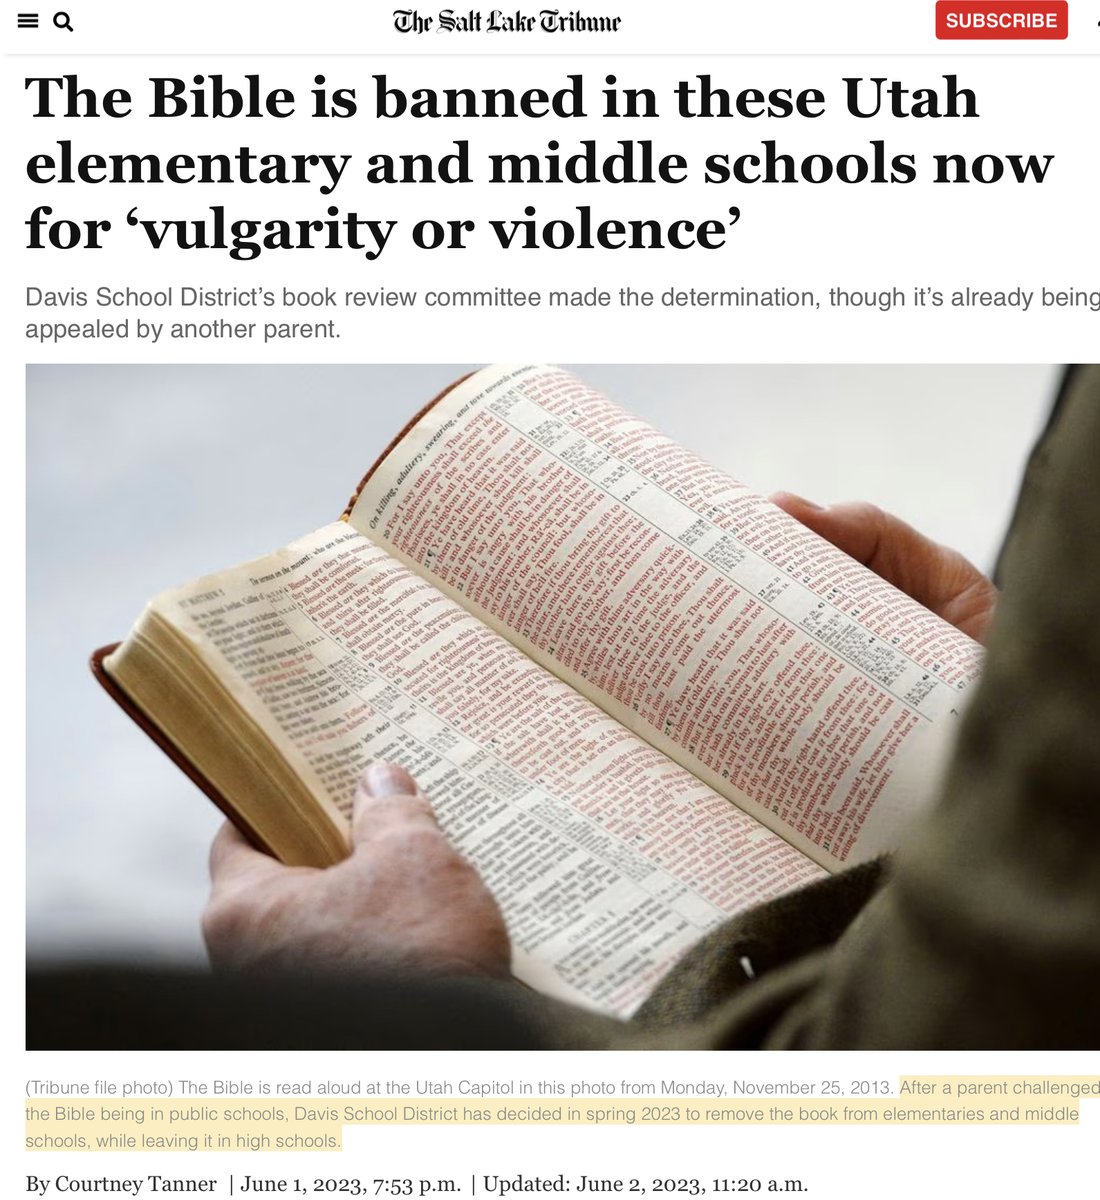 An emerging strategy that could be decisive is to leverage the bigoted, censorious Right's phalanx of unpopular laws against them. Here's 3 examples.

Ban the bible from schools: bit.ly/3qlU5ev 

🧵1/3 #ChristianNationalism #AmericanTaliban #AuthoritarianGOP #ABlueView